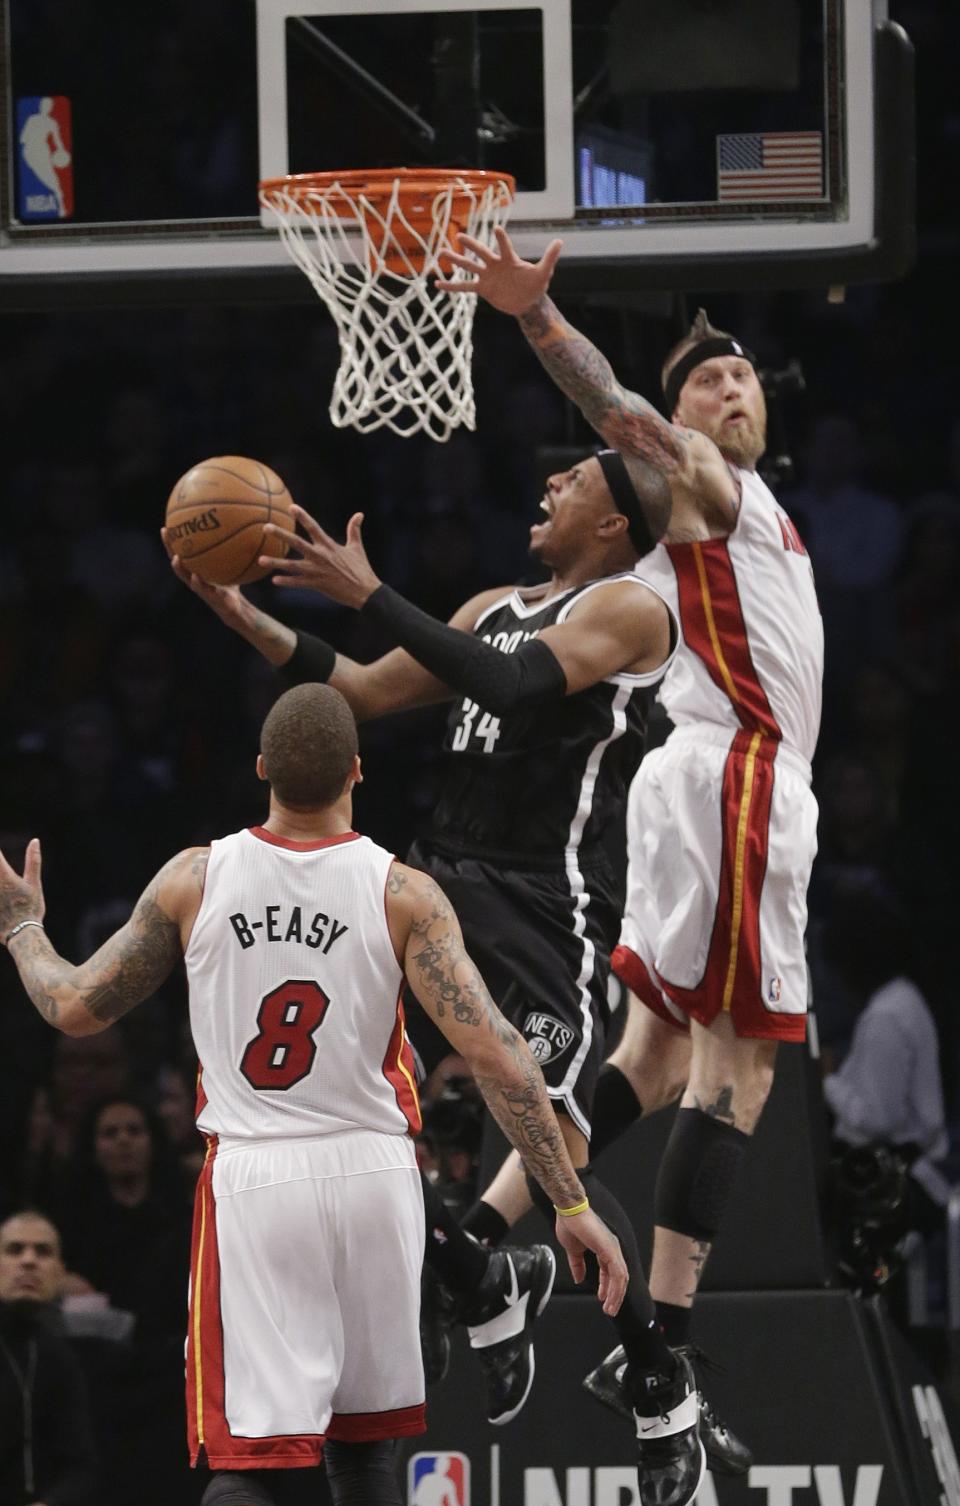 Brooklyn Nets' Paul Pierce (34) drives past Miami Heat's Chris Andersen (11) during the first half of an NBA basketball game on Friday, Jan. 10, 2014, in New York. (AP Photo/Frank Franklin II)